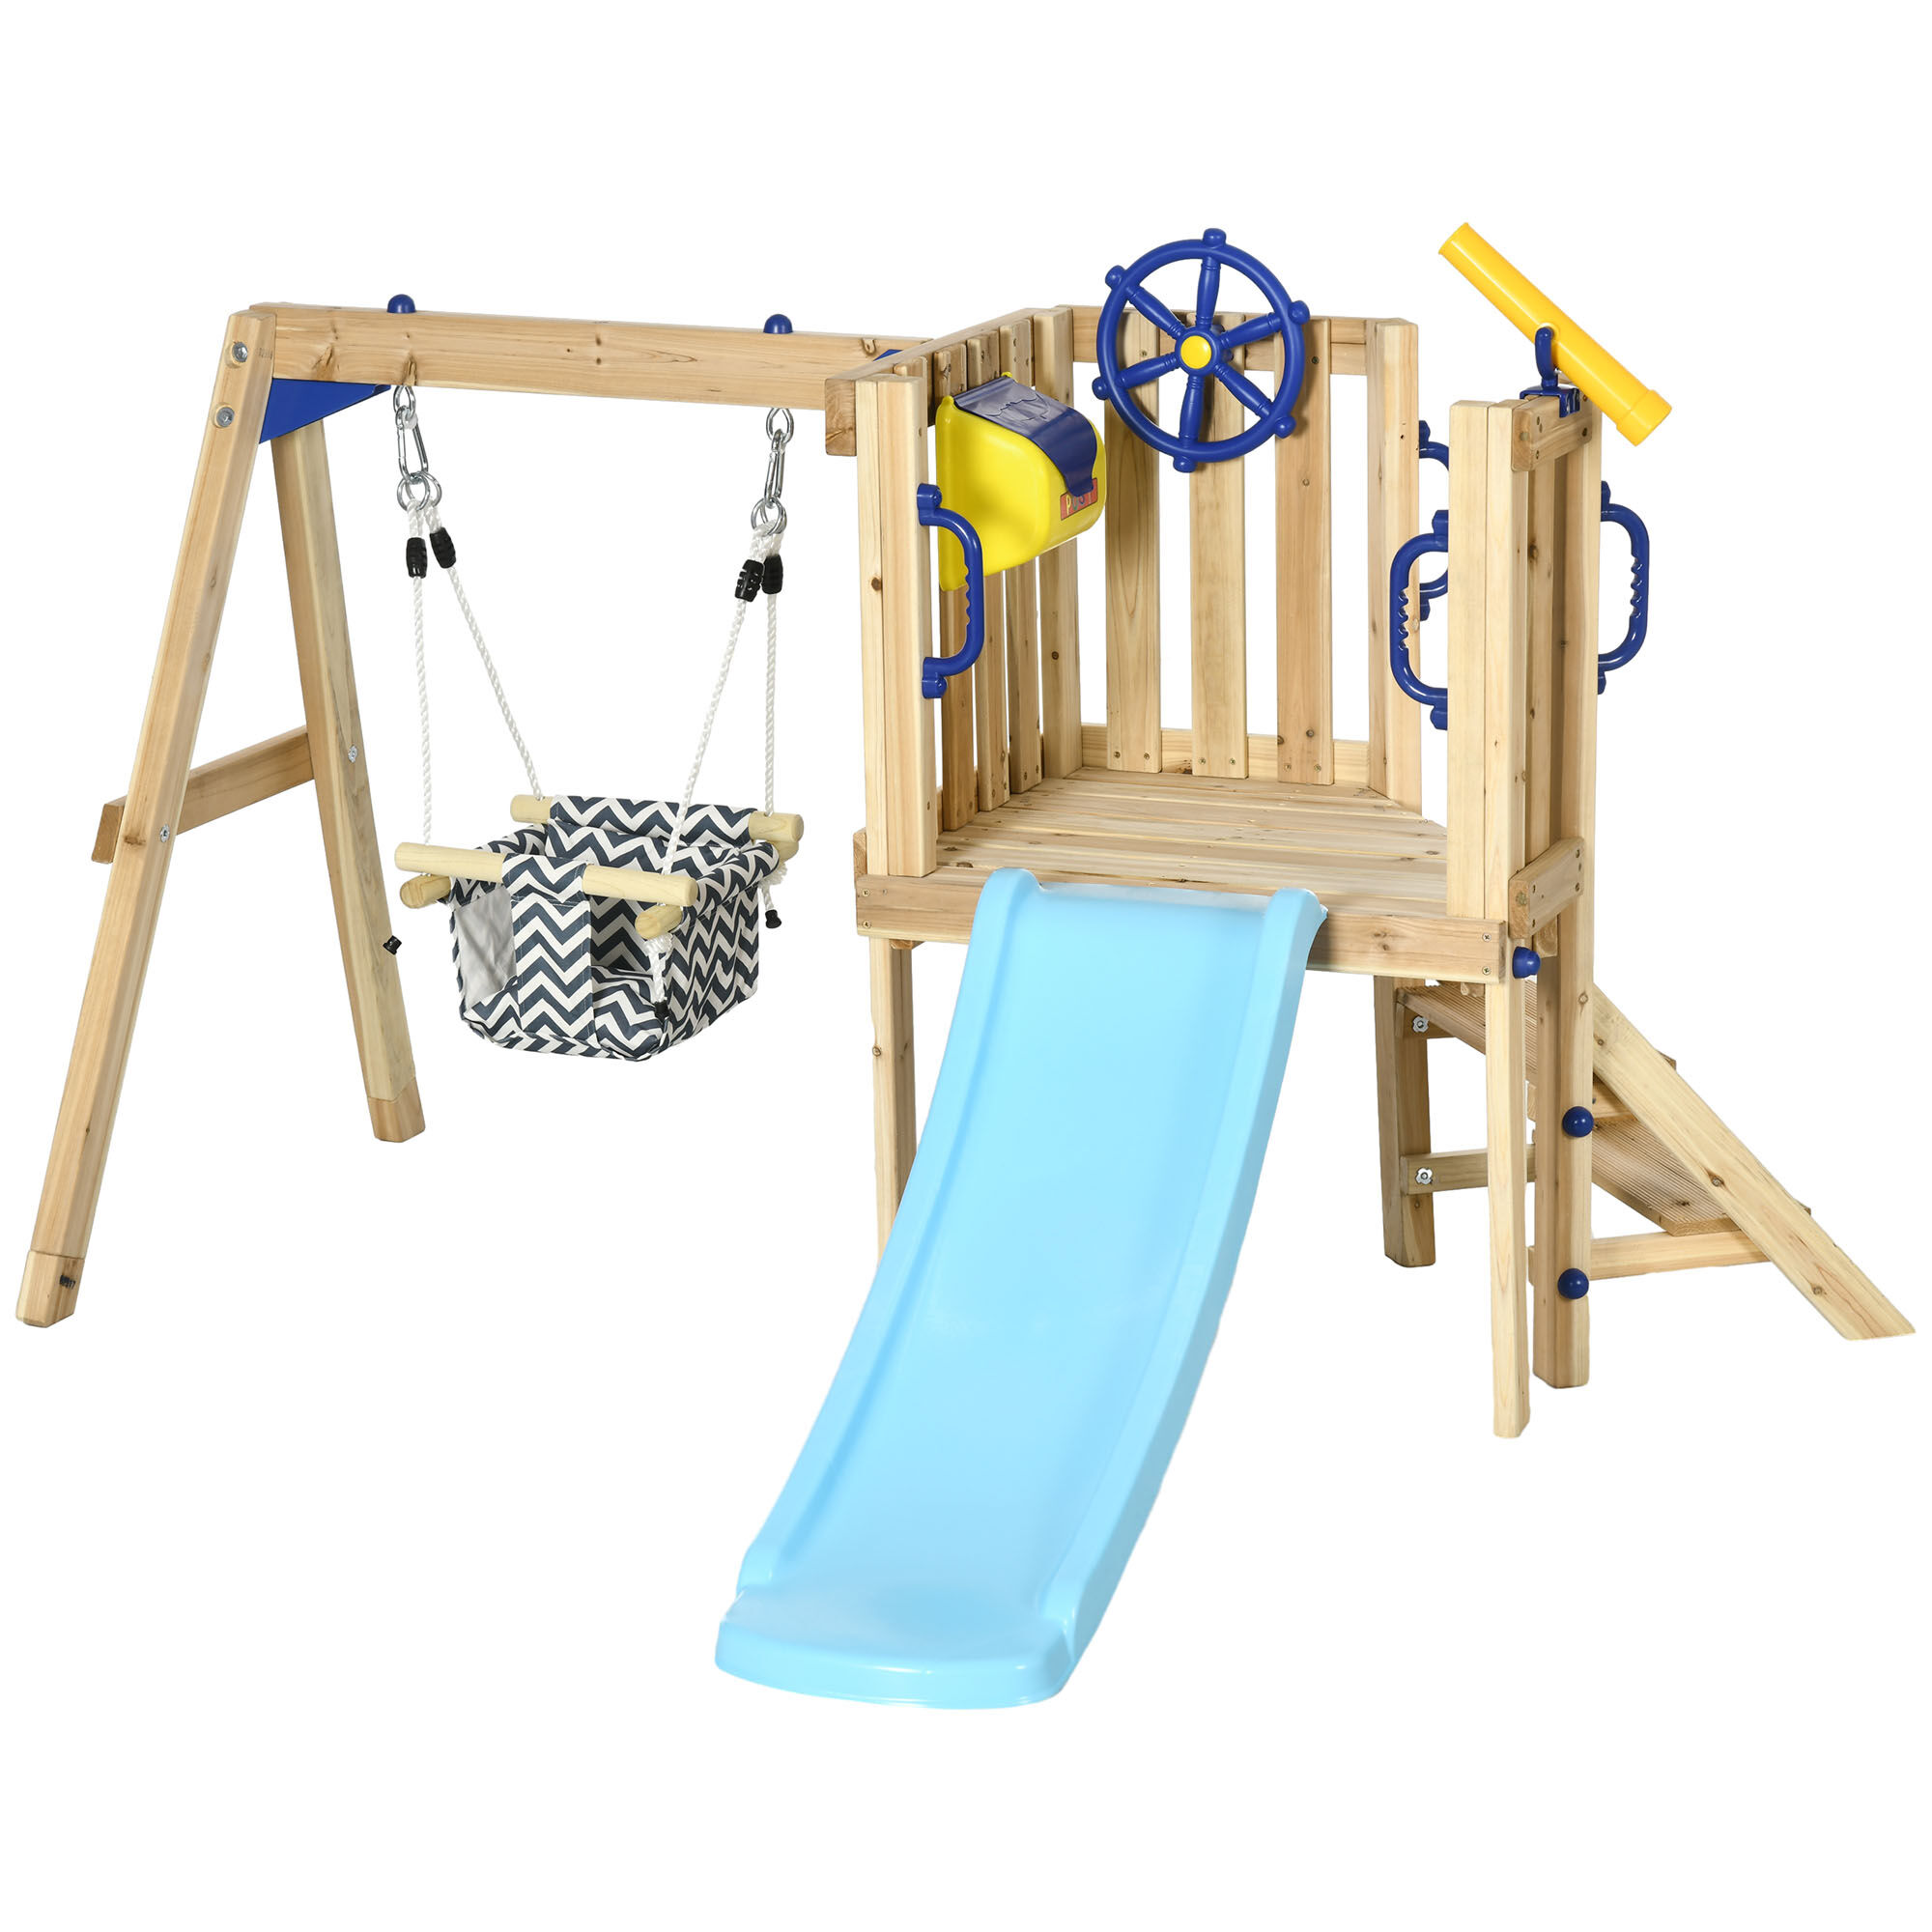 Outsunny 3 in 1 Wooden Swing Set with Slide, Swing Seat with Fort, Wheel, Telescope & Mailbox, 1.5-4 Years Old, Childrens Outdoor Toys, Natural